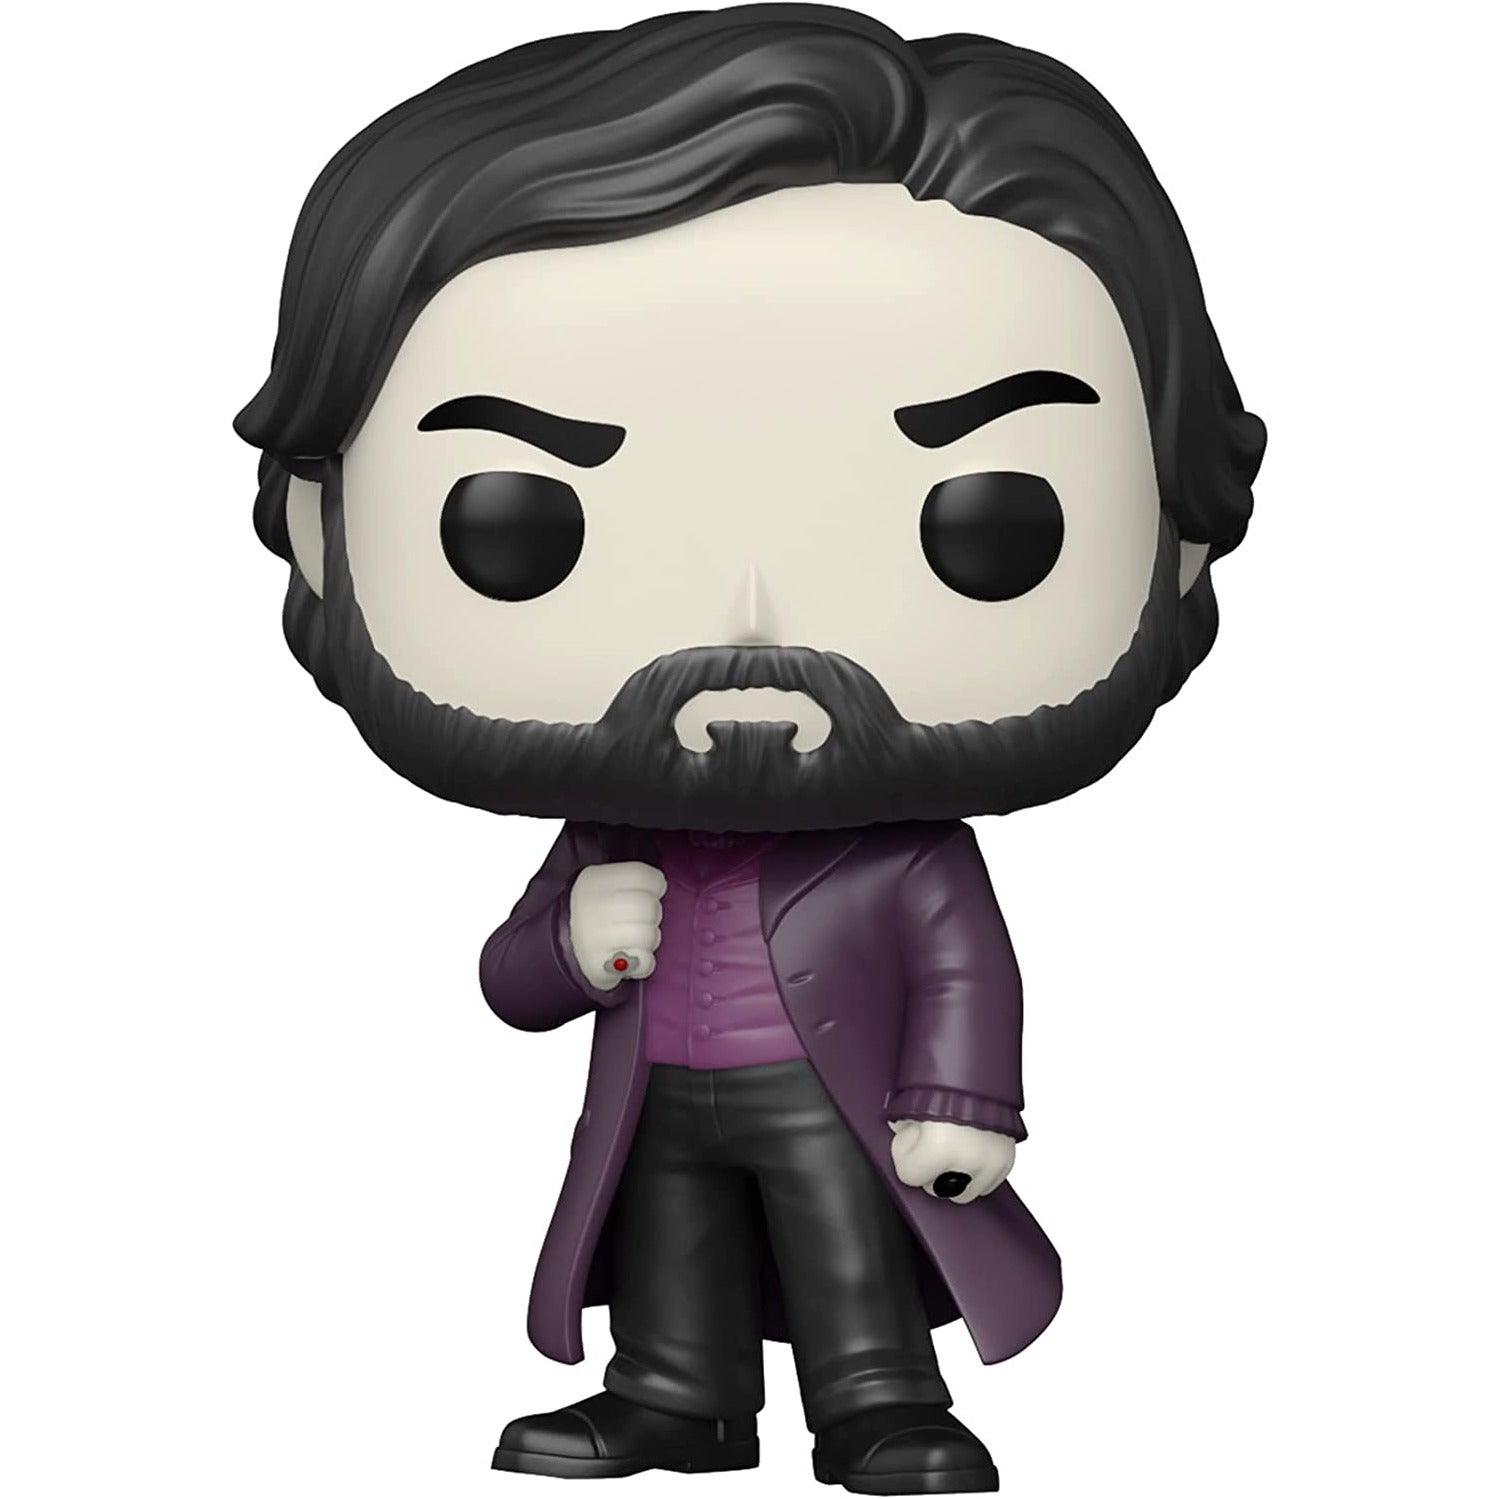 Funko POP! Television: What We Do in The Shadows - Laszlo